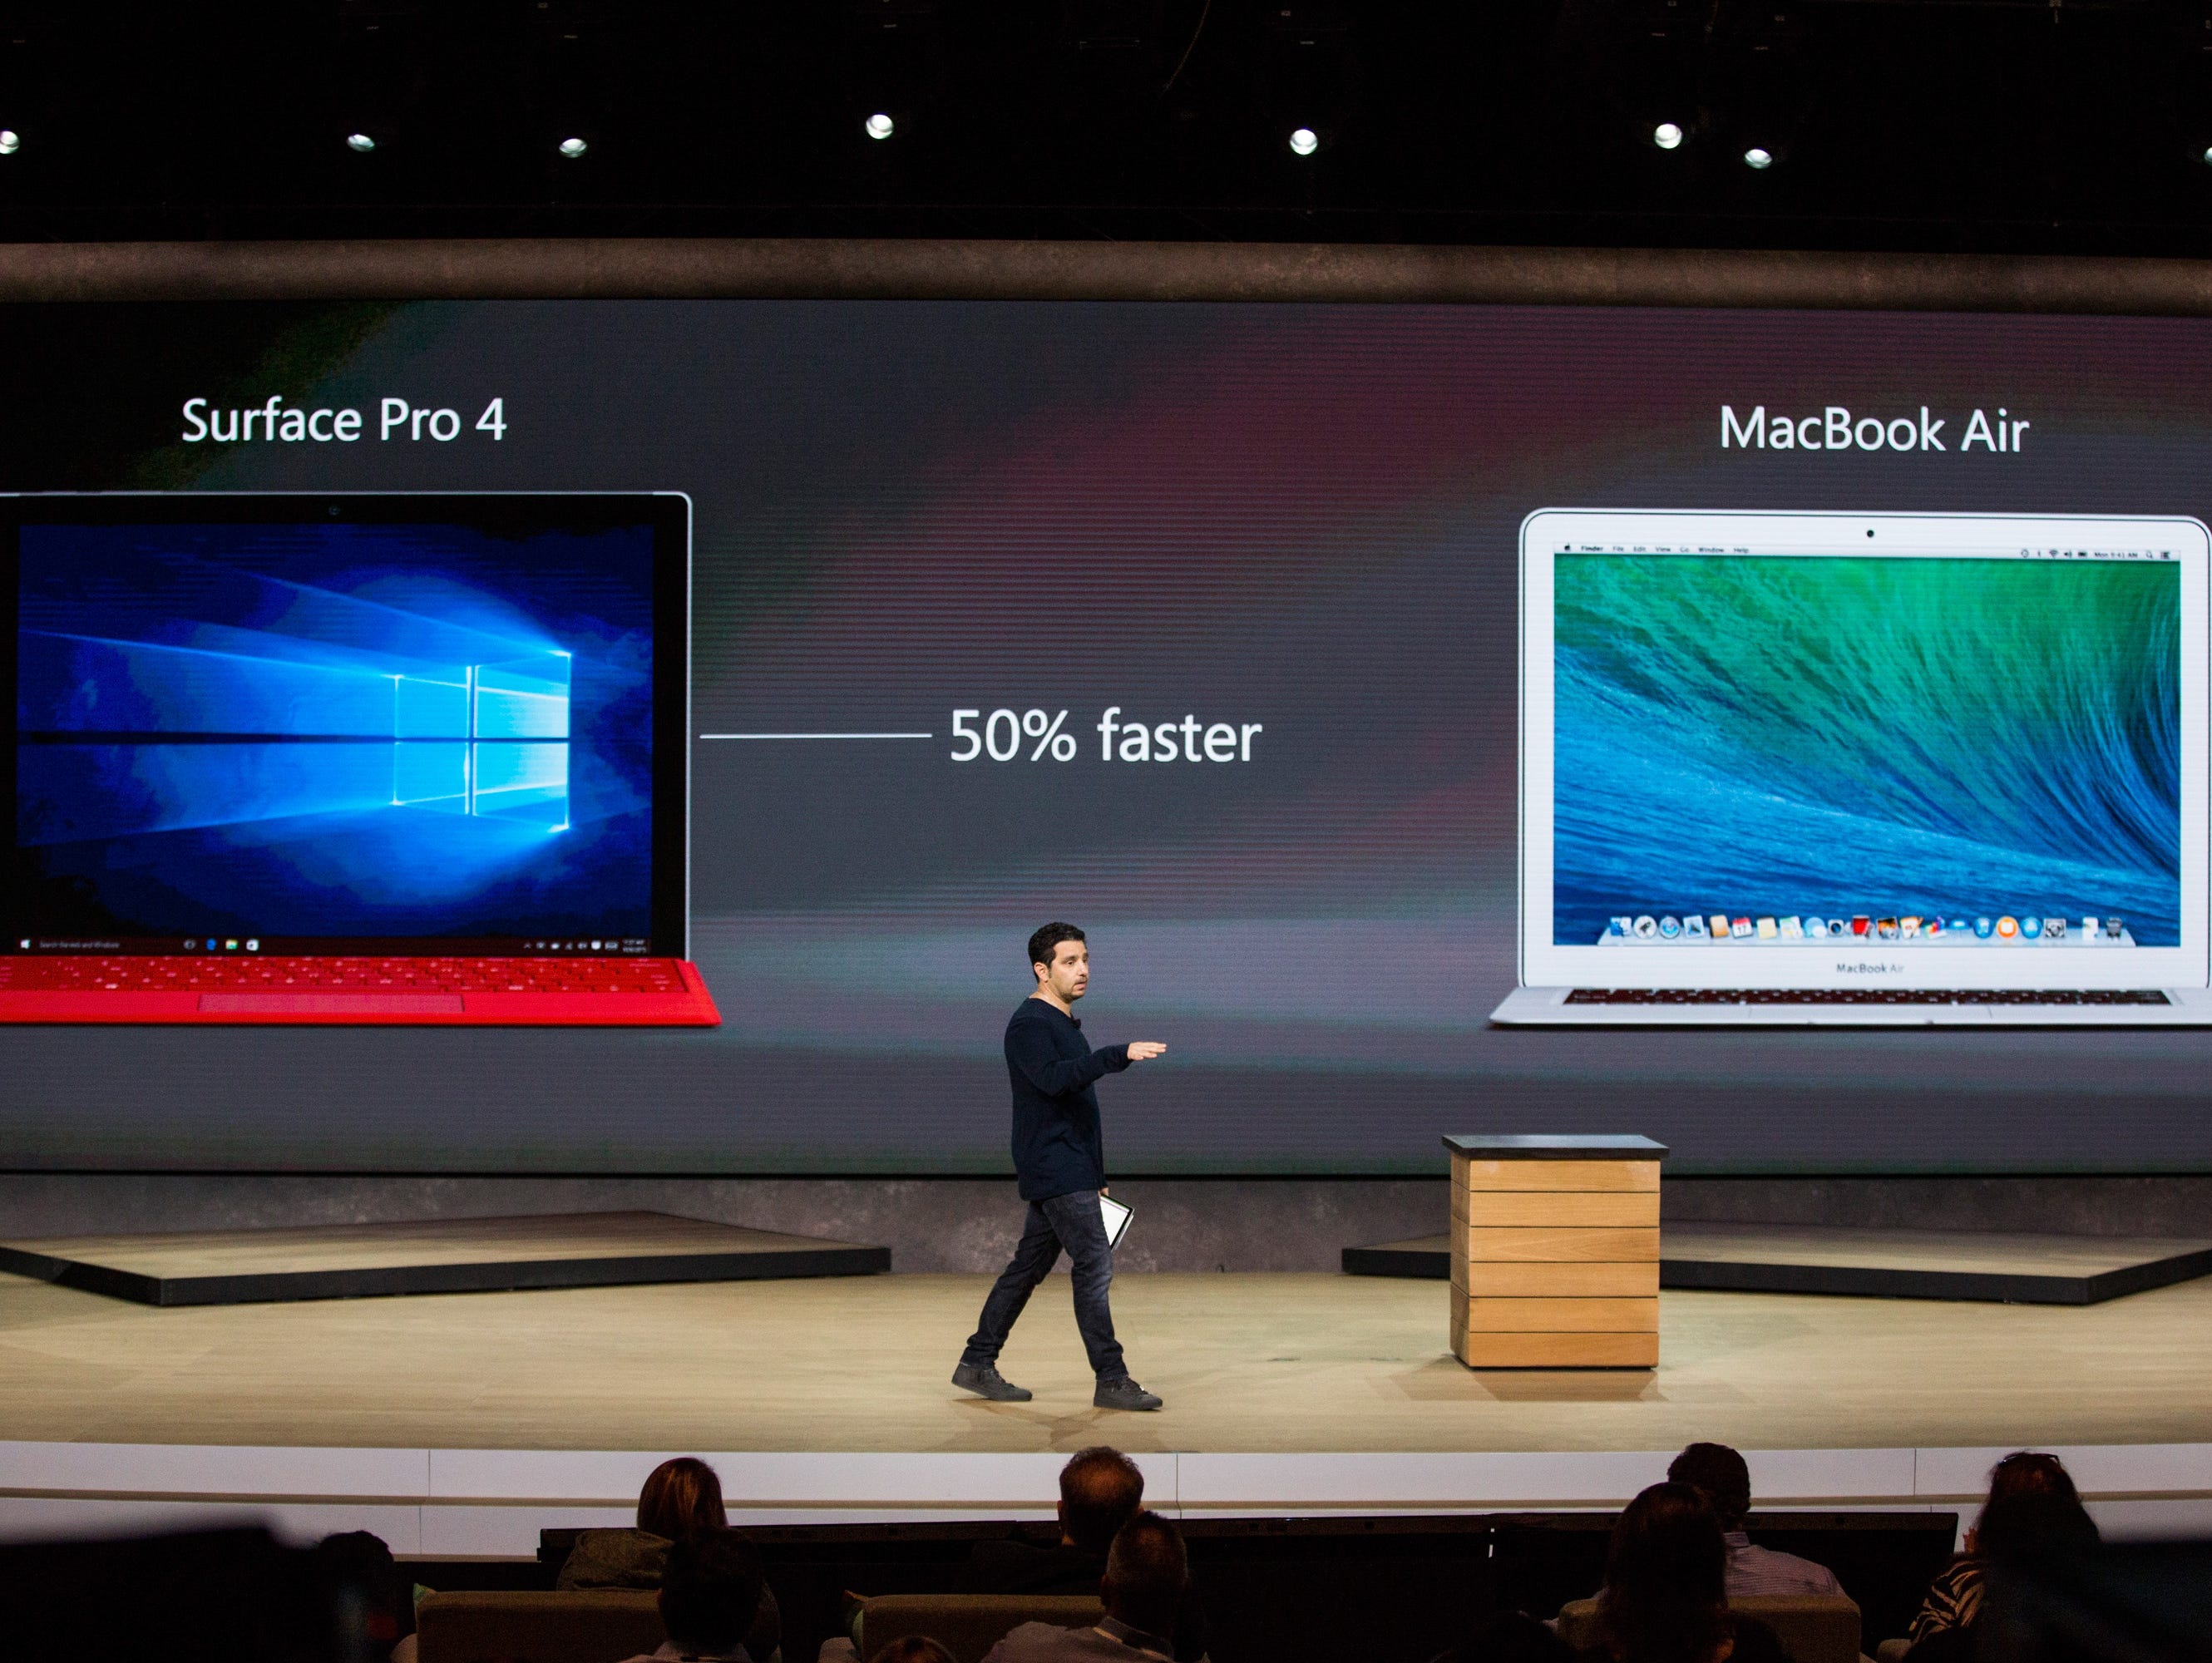 Microsoft Corporate Vice President Panos Panay introduces a new tablet titled the Microsoft Surface Pro 4 at a media event for new Microsoft products on Oct. 6, 2015 in New York City.